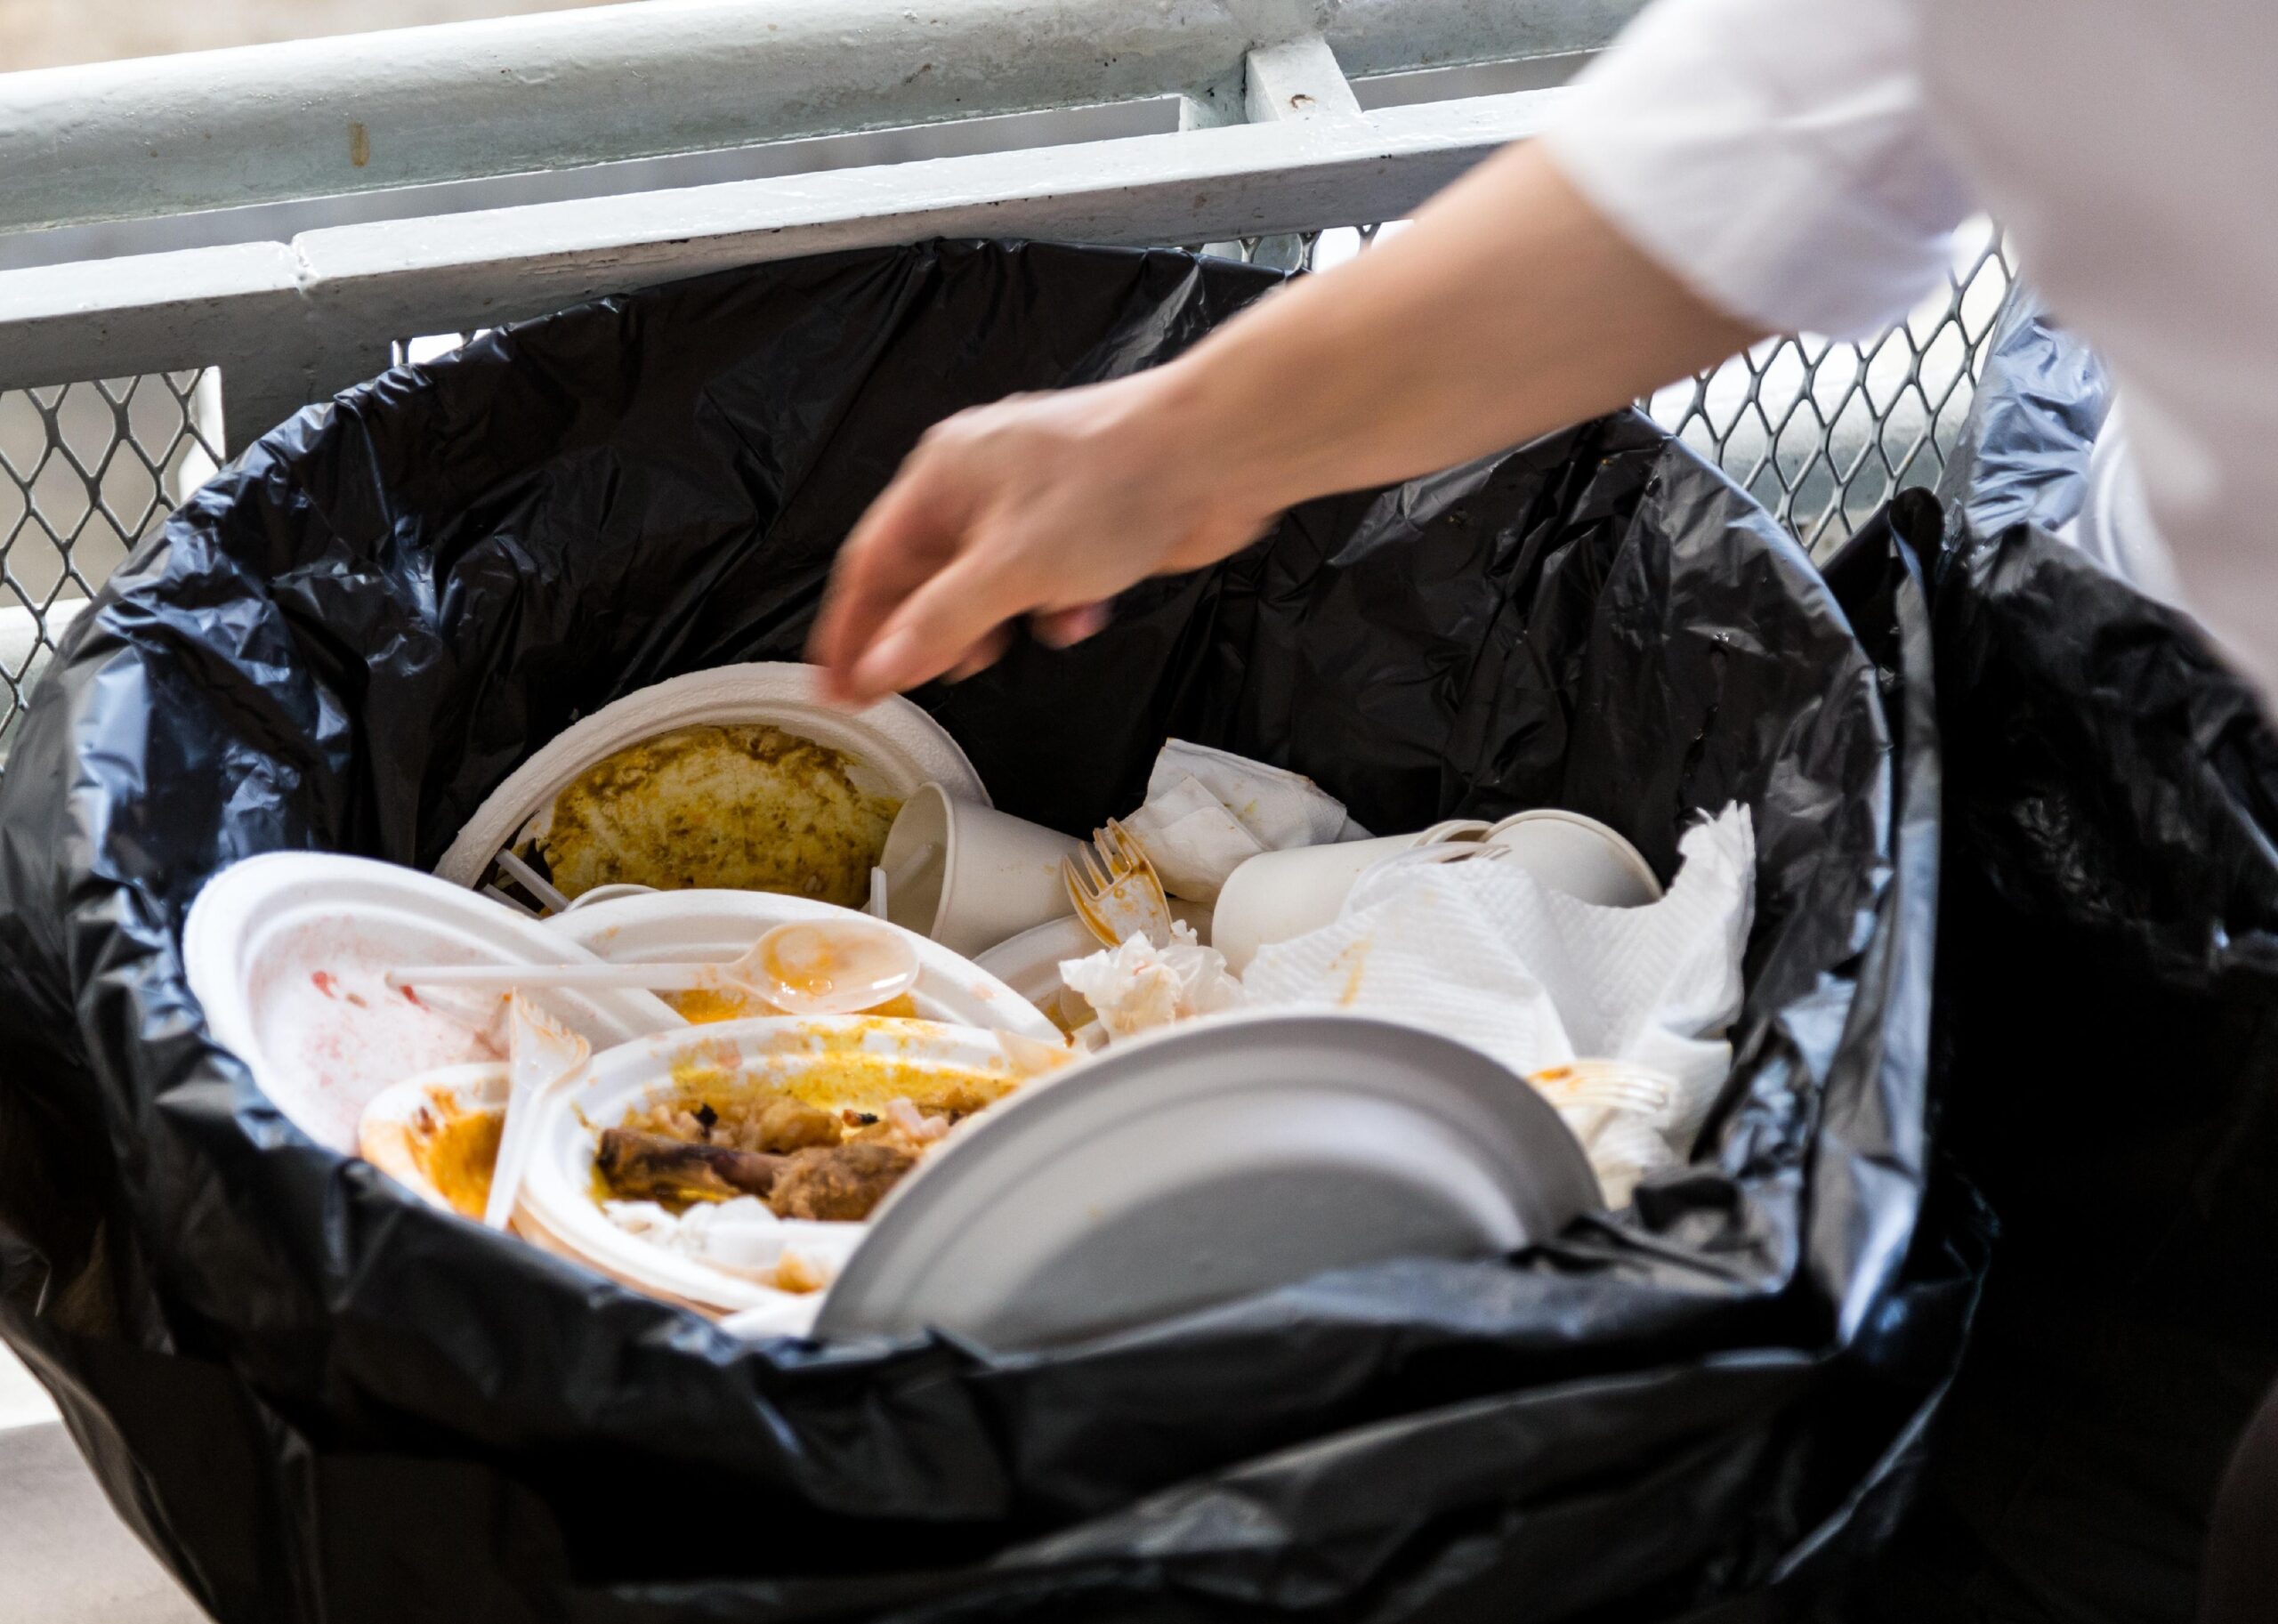 Next Insurance examined data from the EPA's Wasted Food Report to see what happens to food waste generated by restaurants in the U.S.   